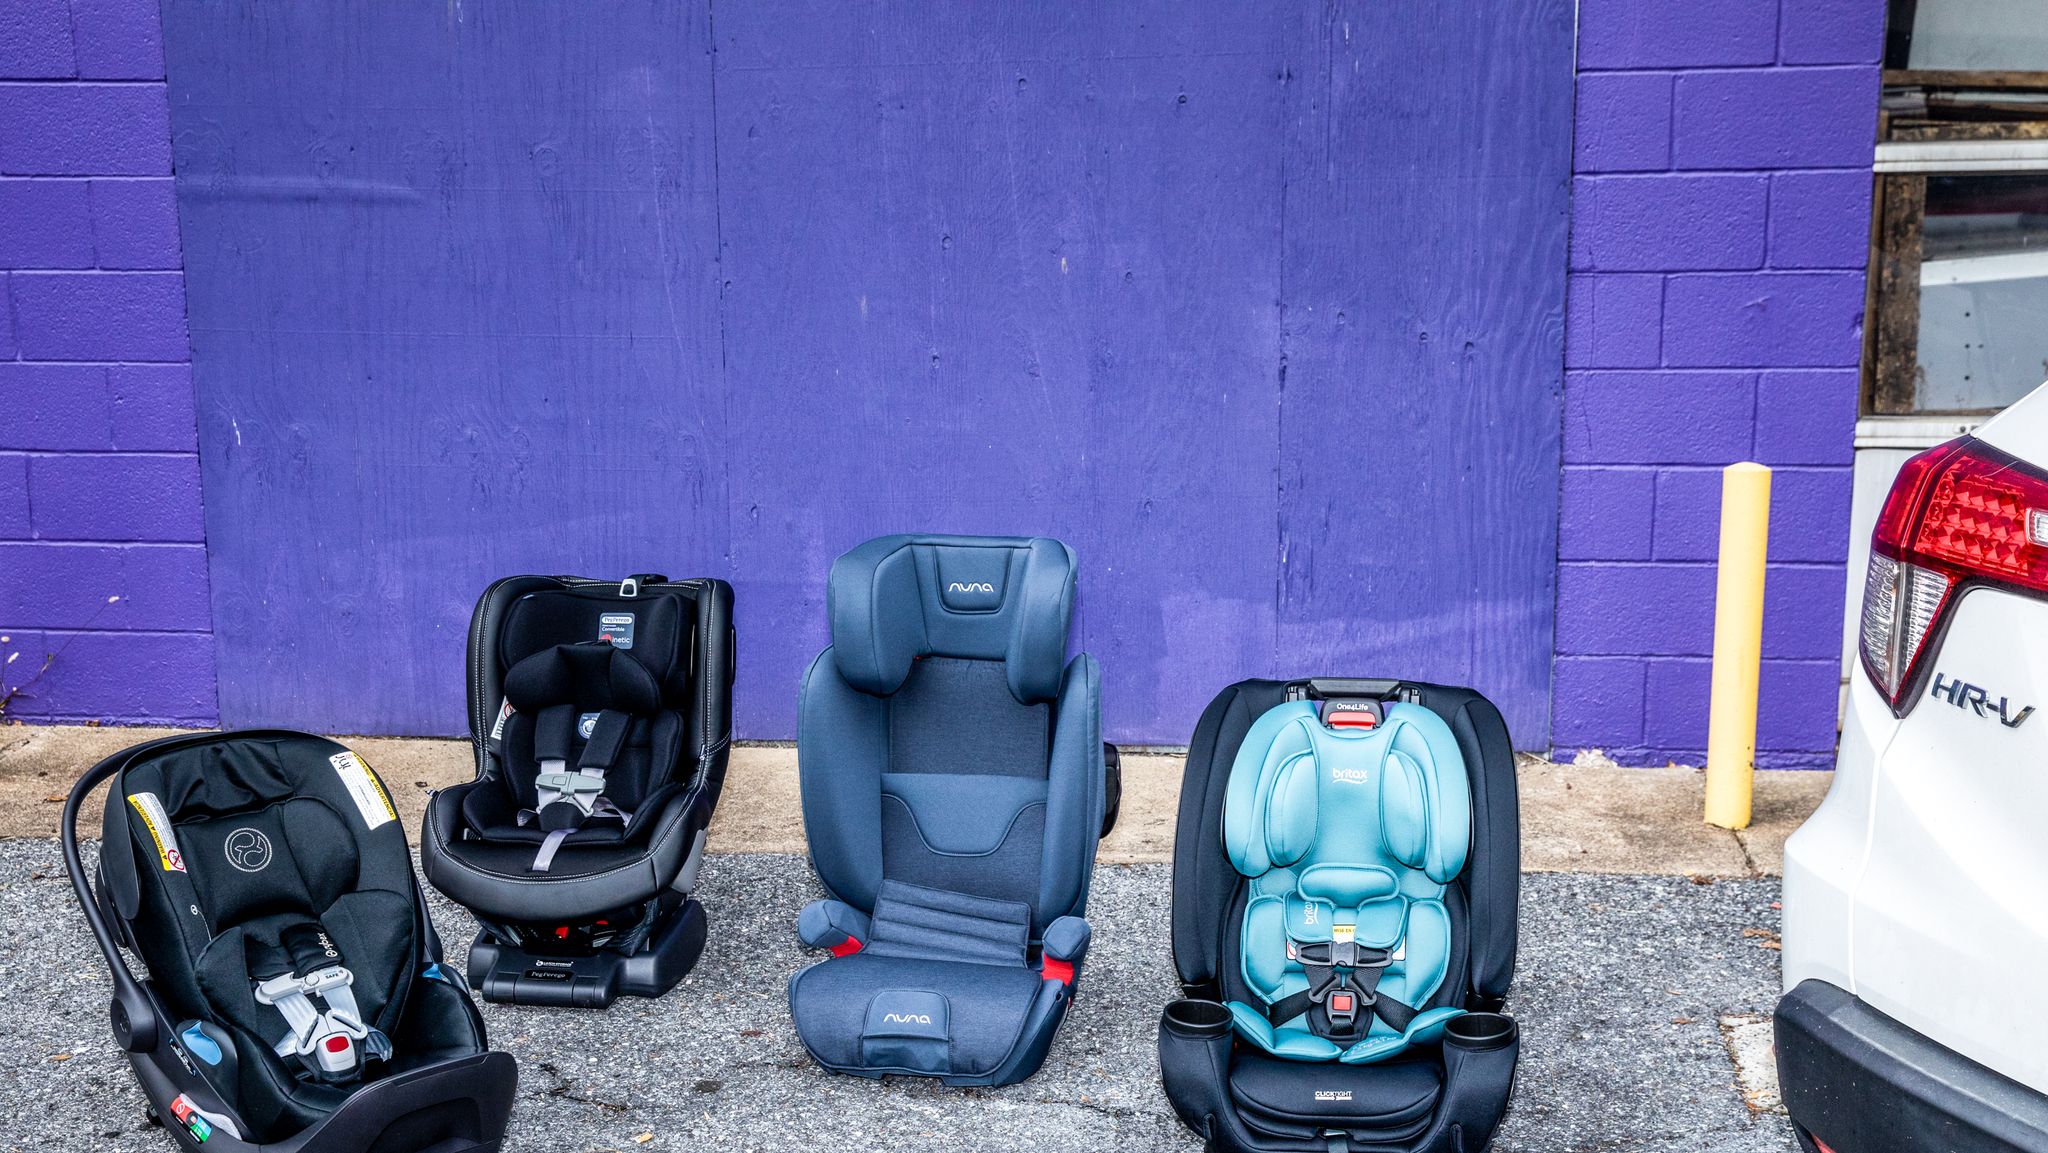 Car seat headrest manufacturing and application of EPP car seat